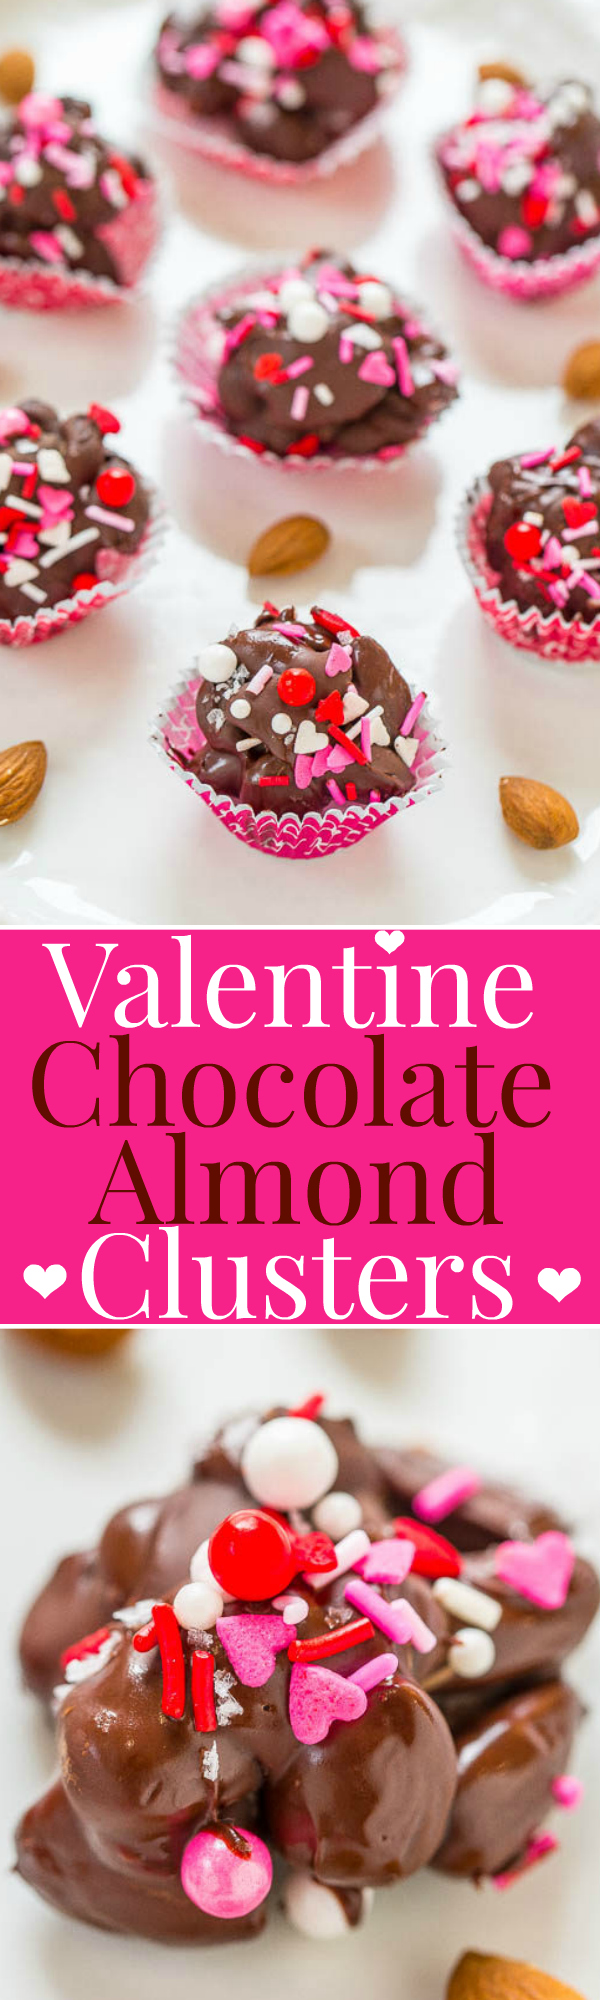 Two picture collage of Valentine chocolate almond clusters with graphic